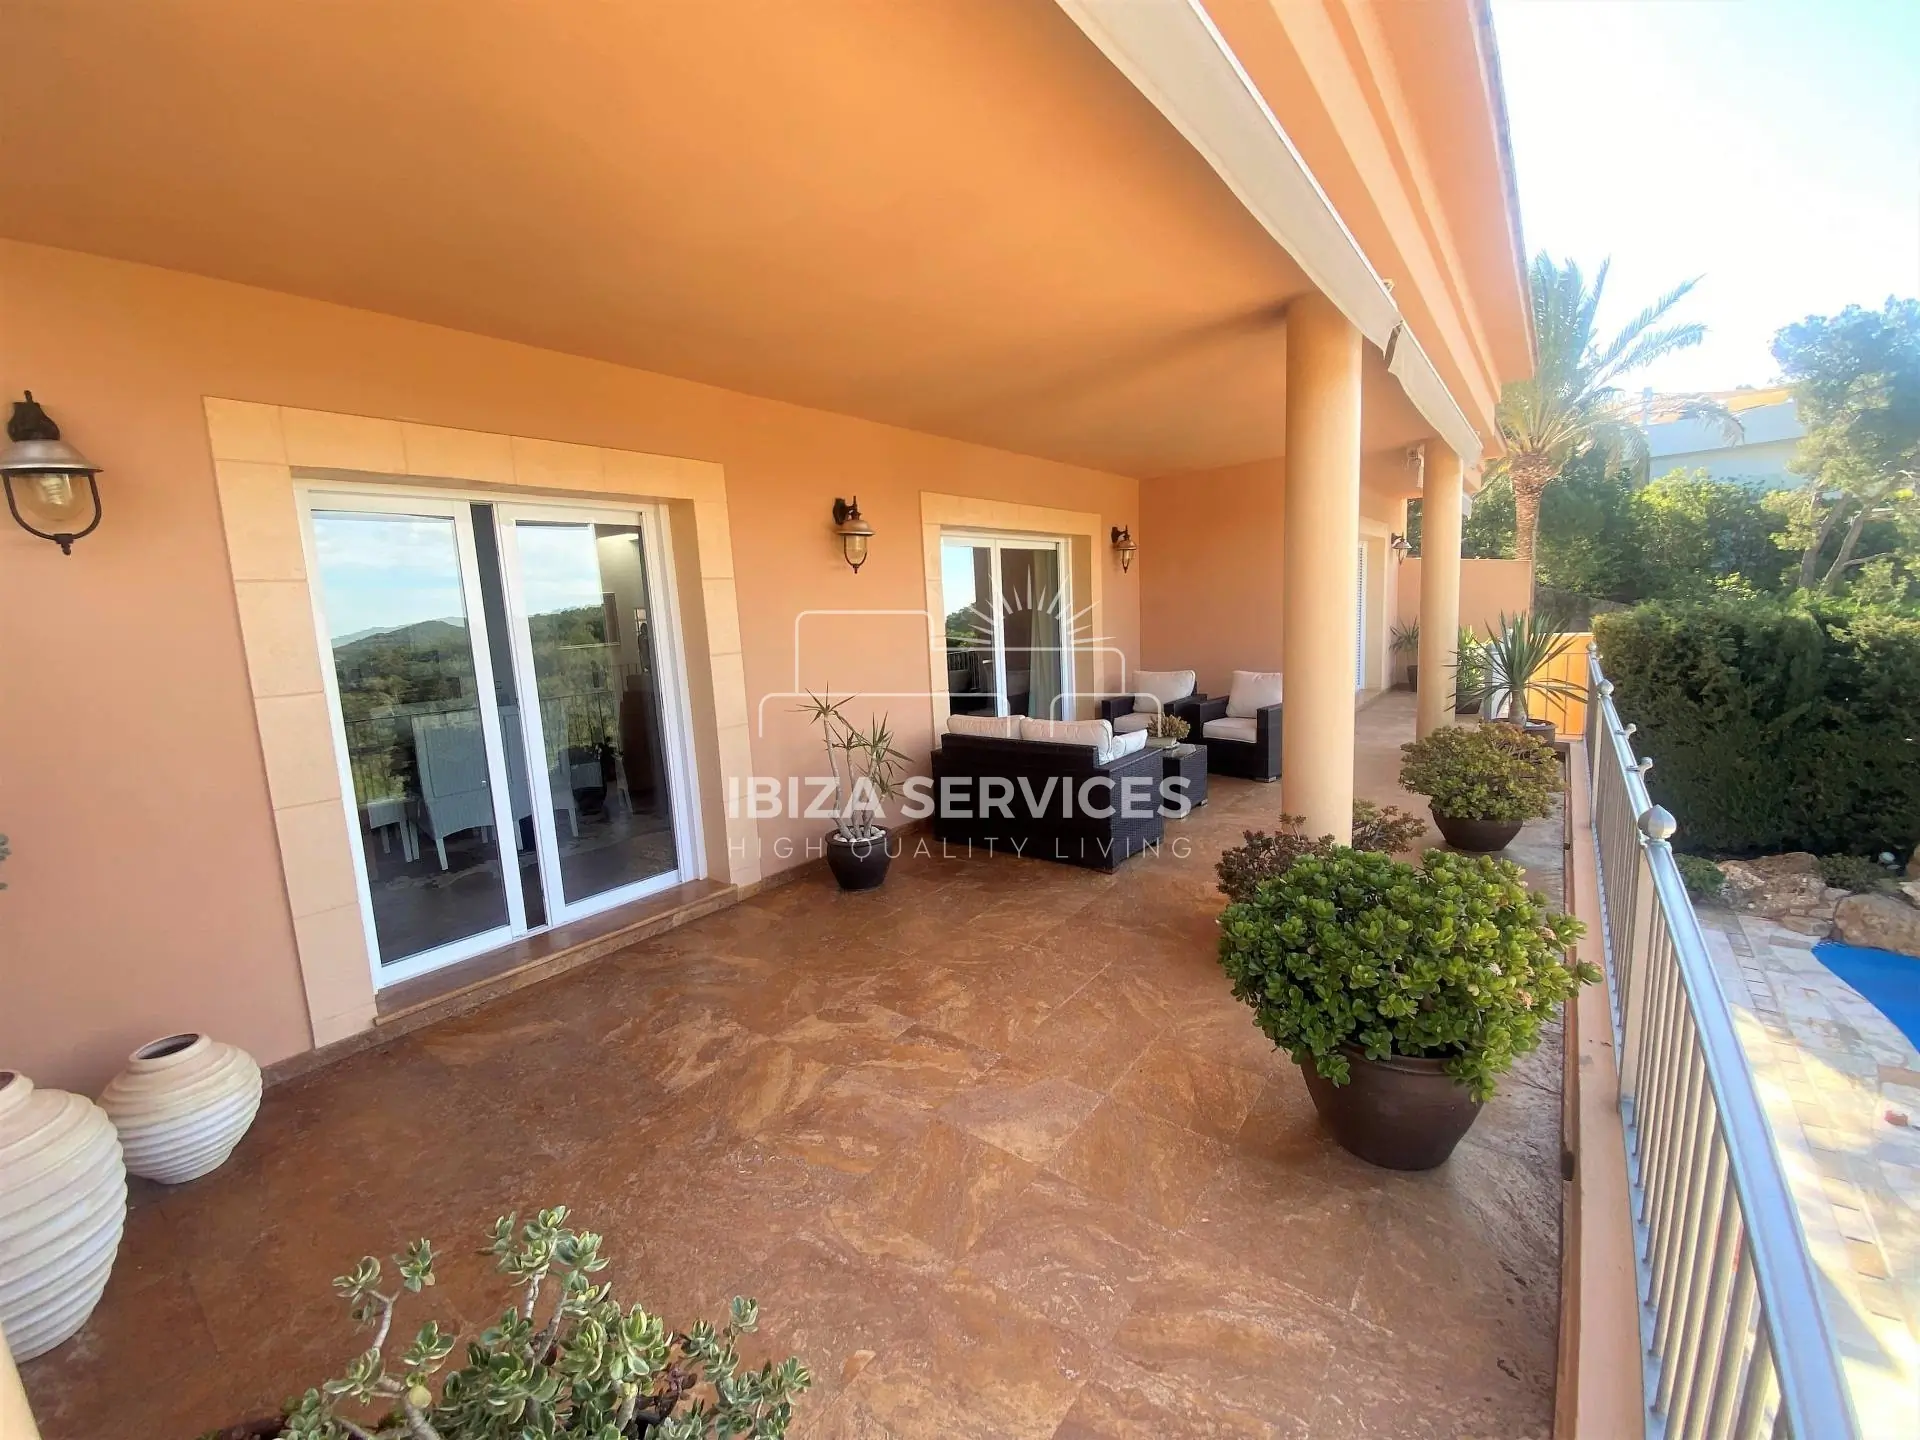 Buy property in Roca llisa as investment